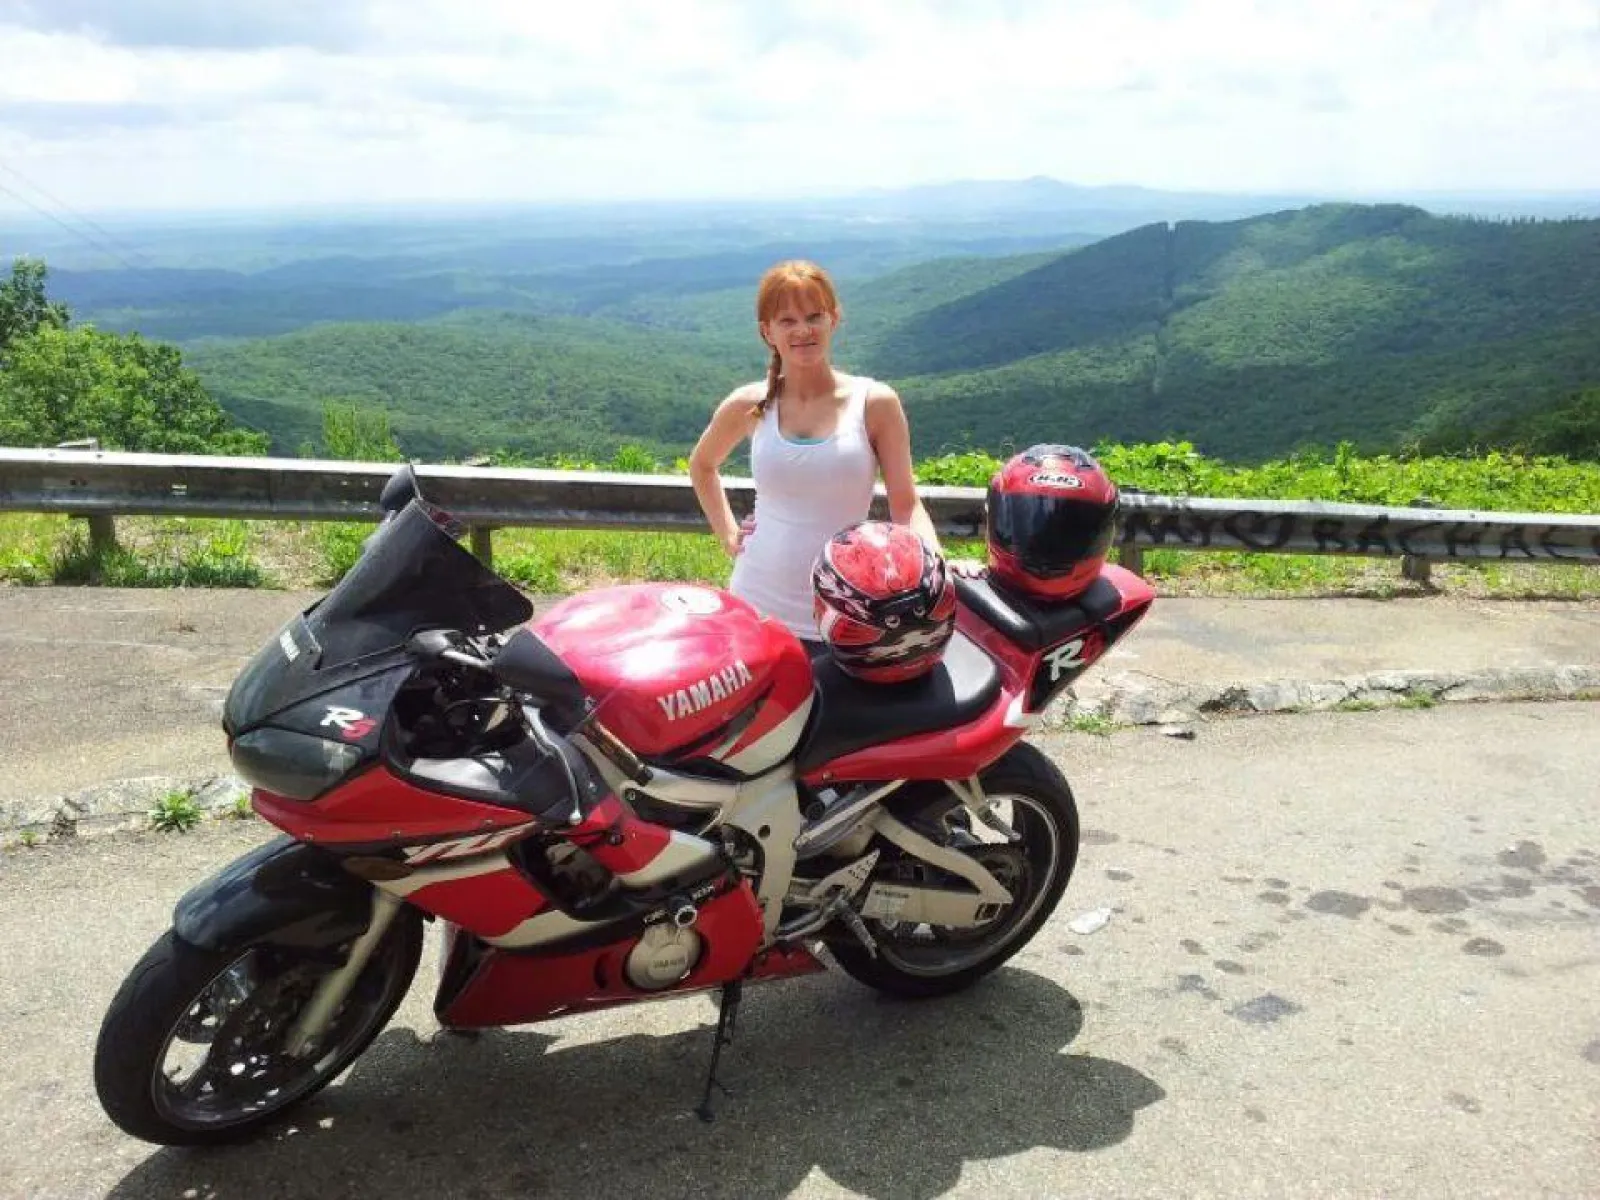 Jessi smiling next to a motorcycle parked on the side of a mountain